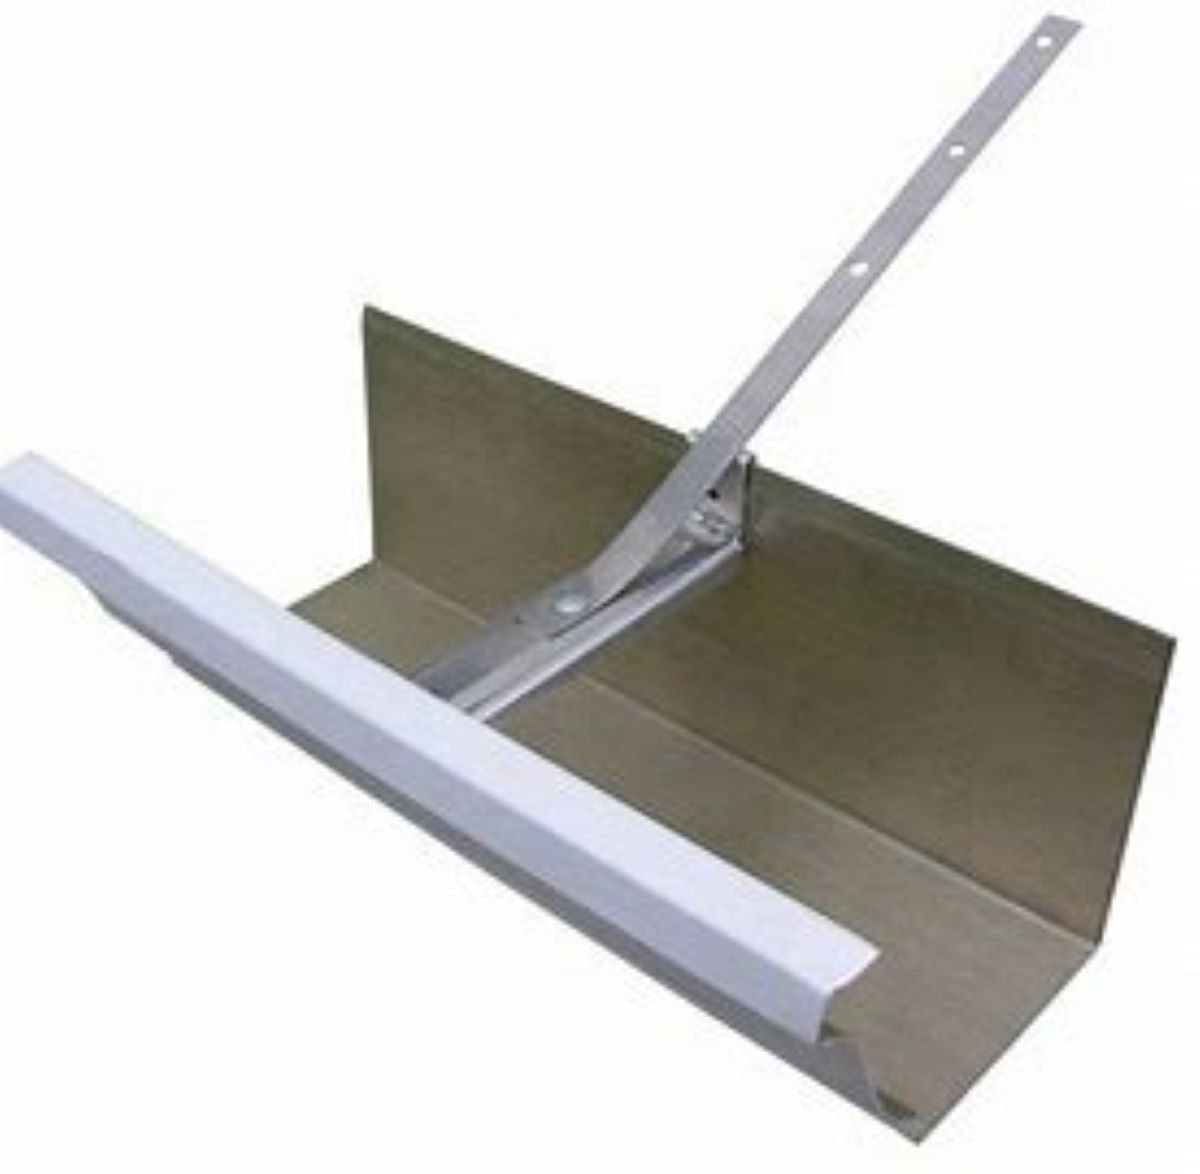 SST Gutter Hangers Aluminum Hanger with Strap for Attaching Gutters Without Fascia 5" or 6"